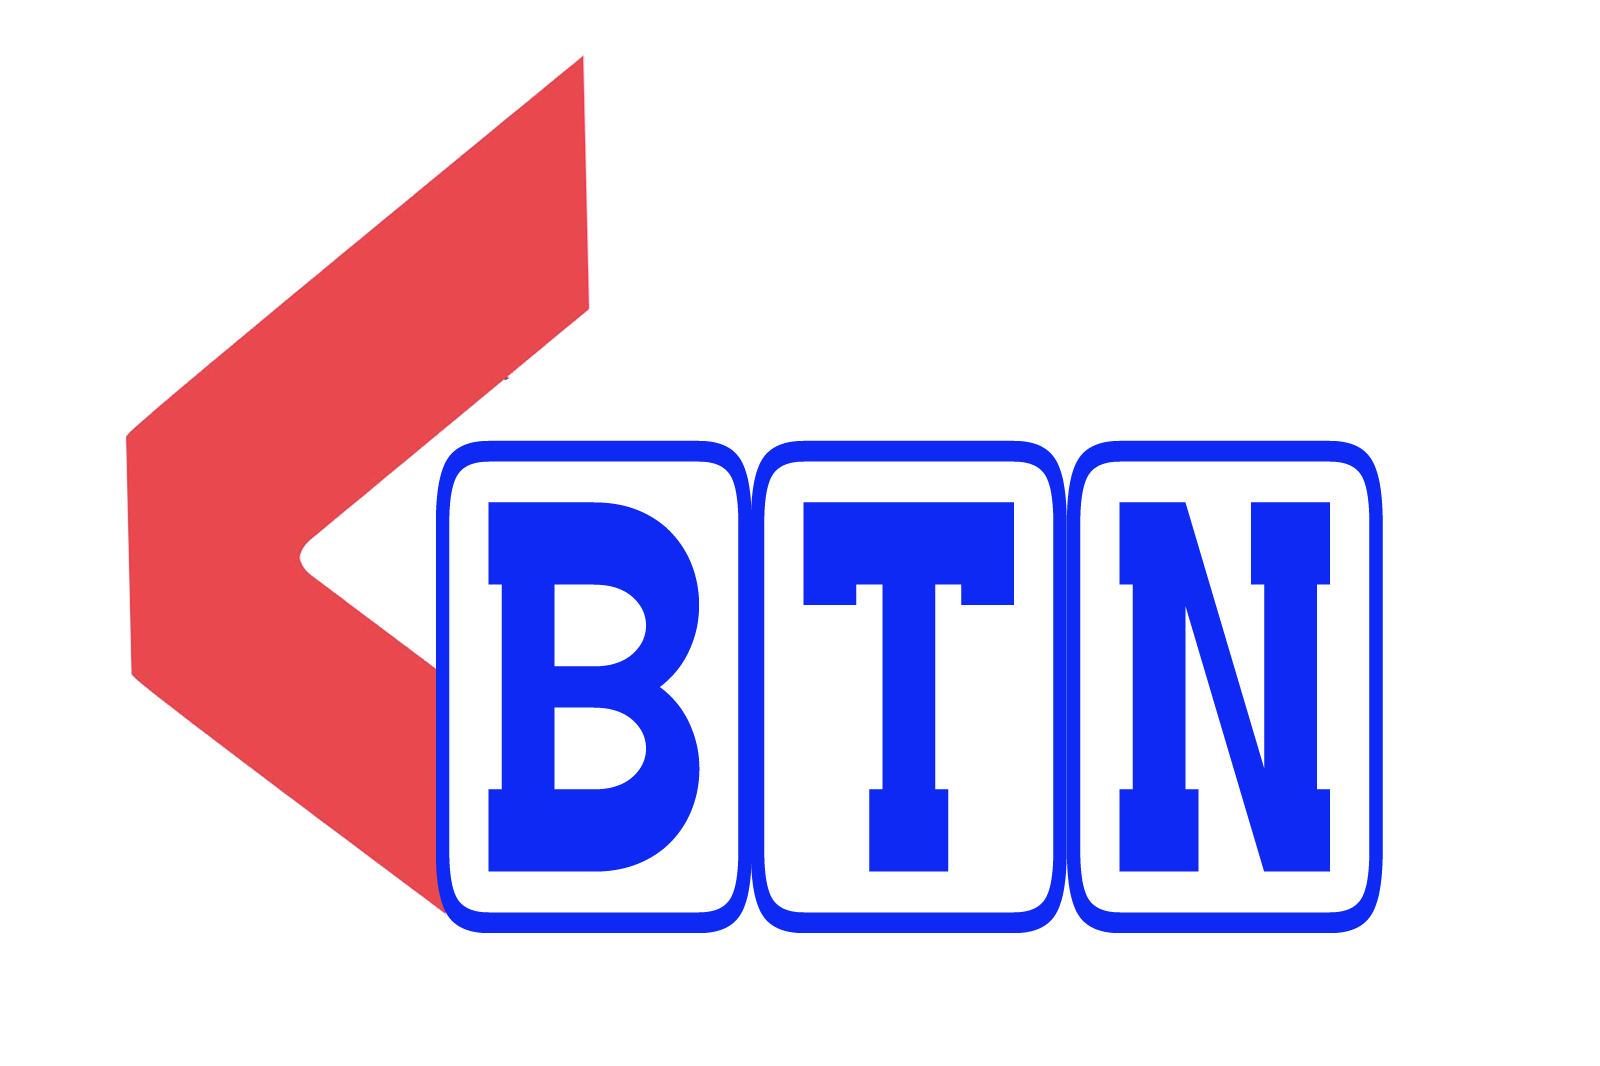 BTN Logo - File:Official BTN logo.png - Wikimedia Commons